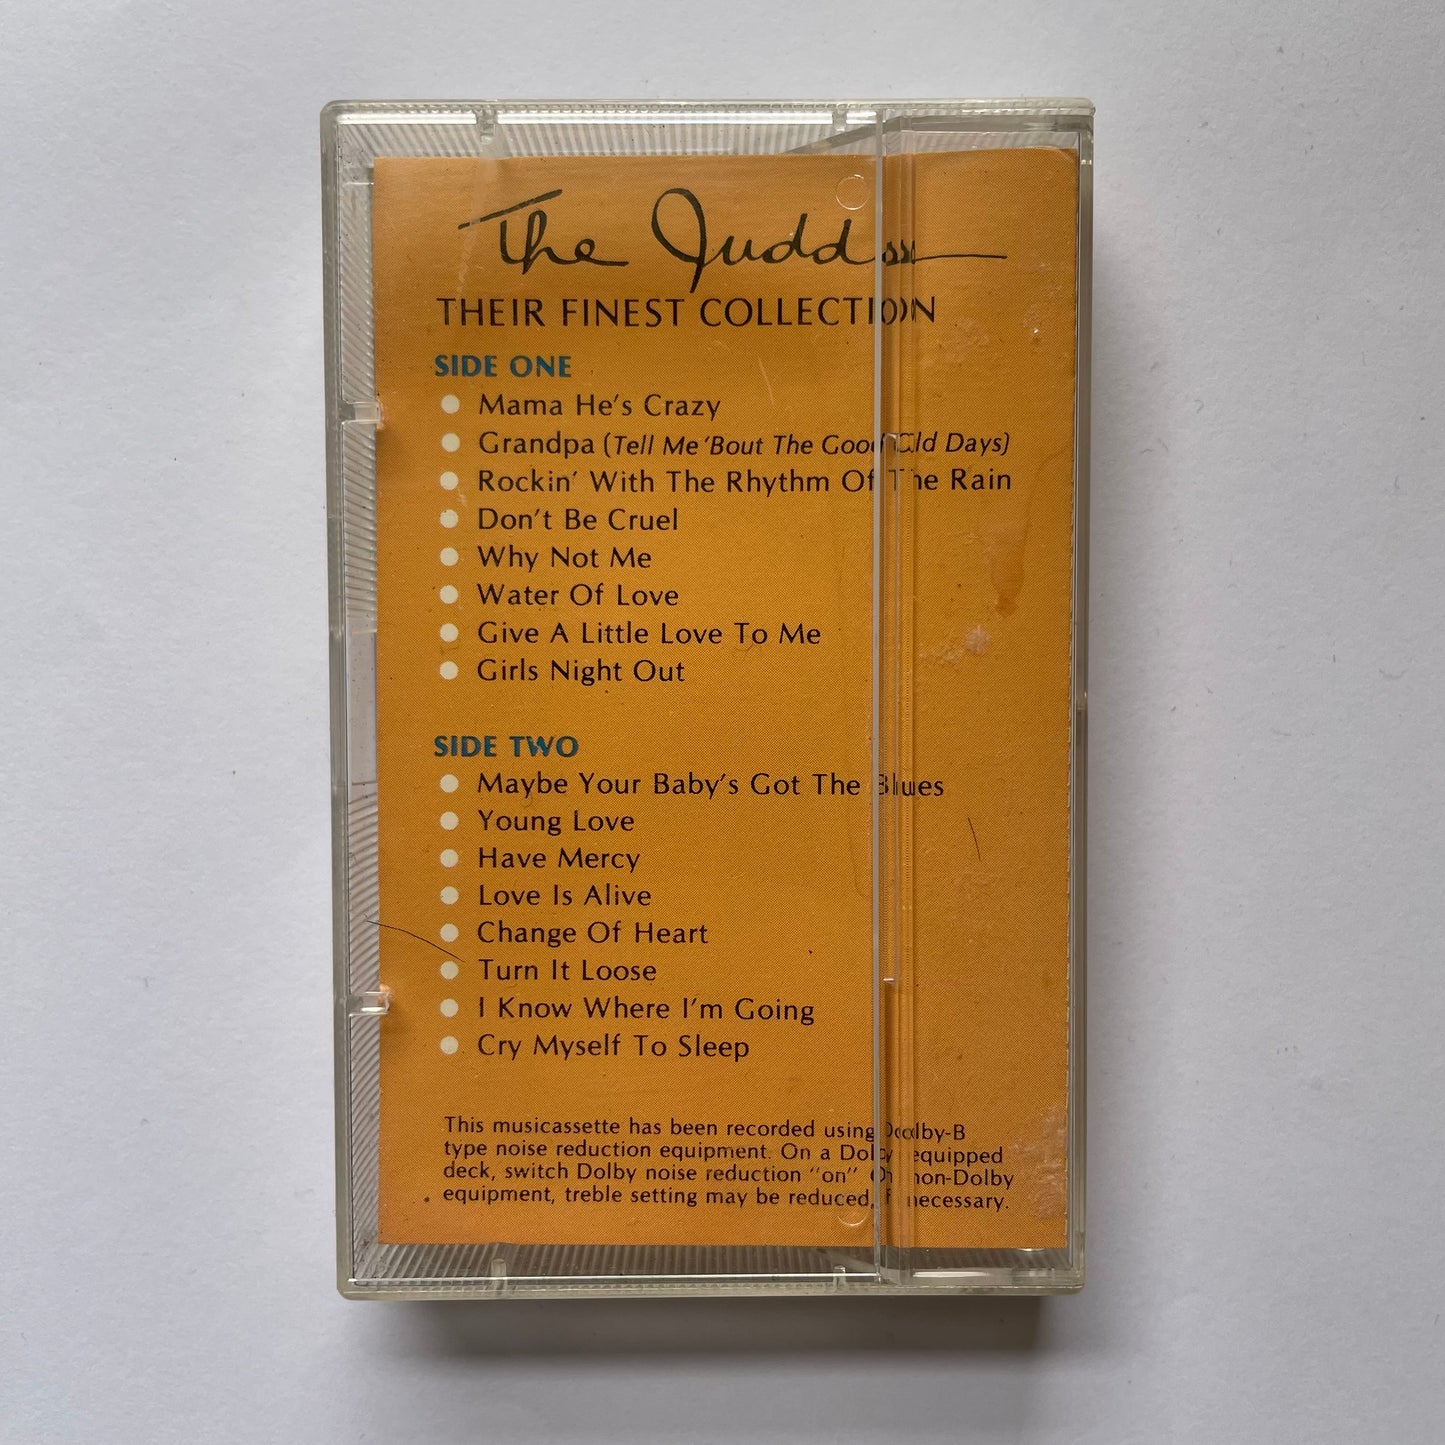 Tape Cassette The Judds Their Finest Collection back